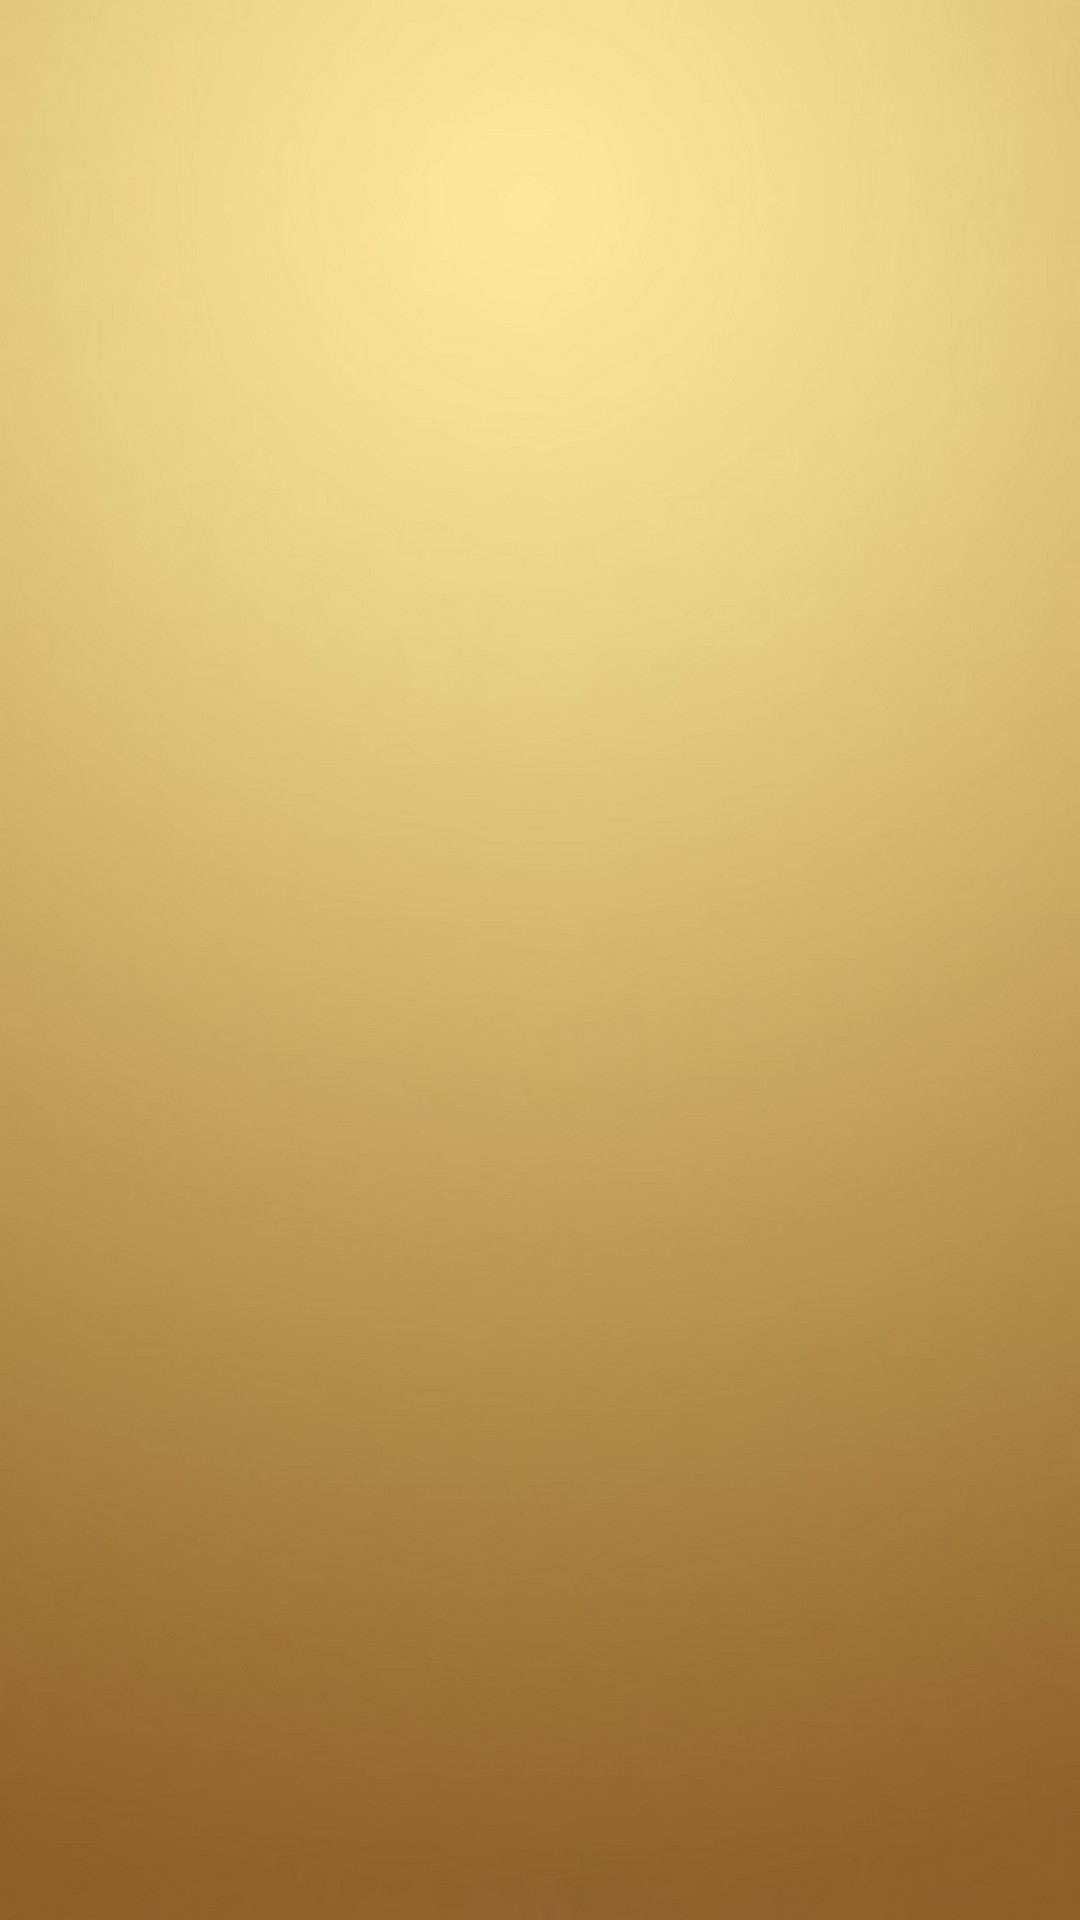 Plain Gold Wallpaper For iPhone resolution 1080x1920